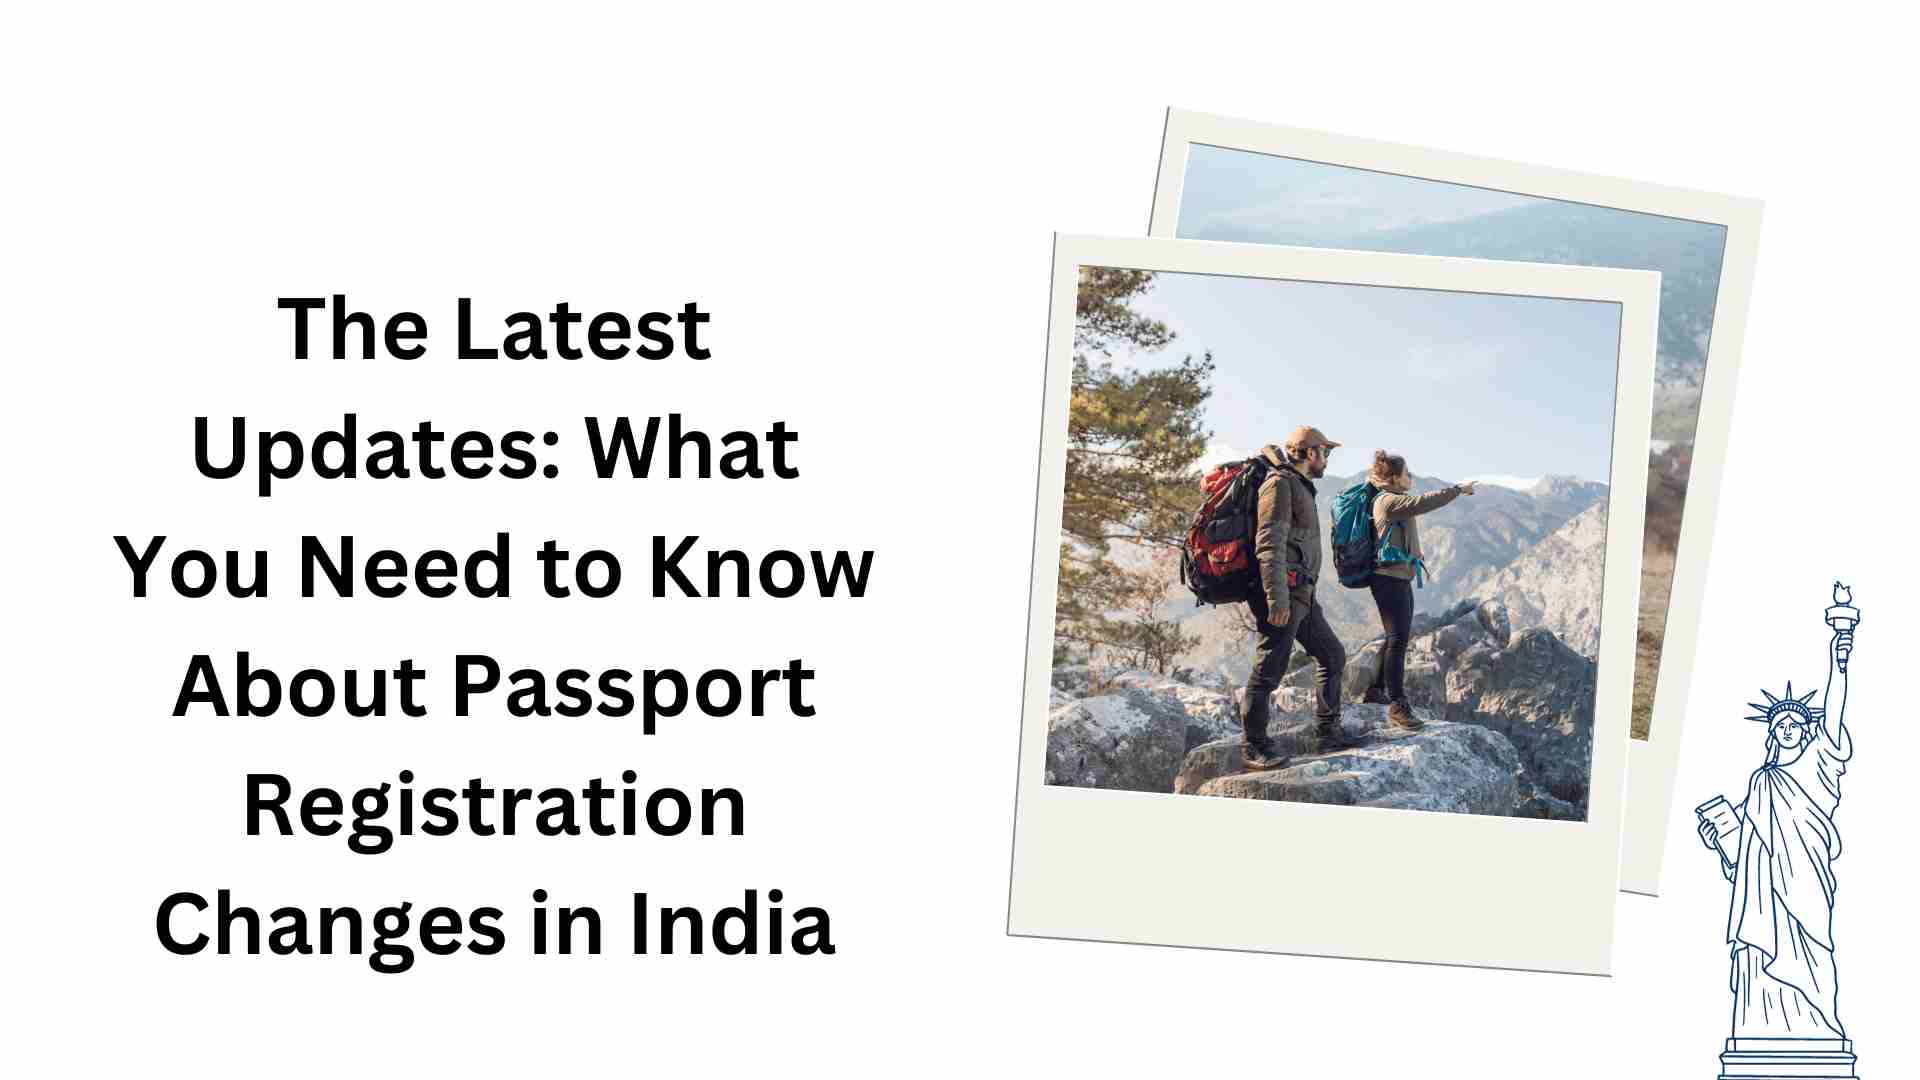 The Latest Updates: What You Need to Know About Passport Registration Changes in India